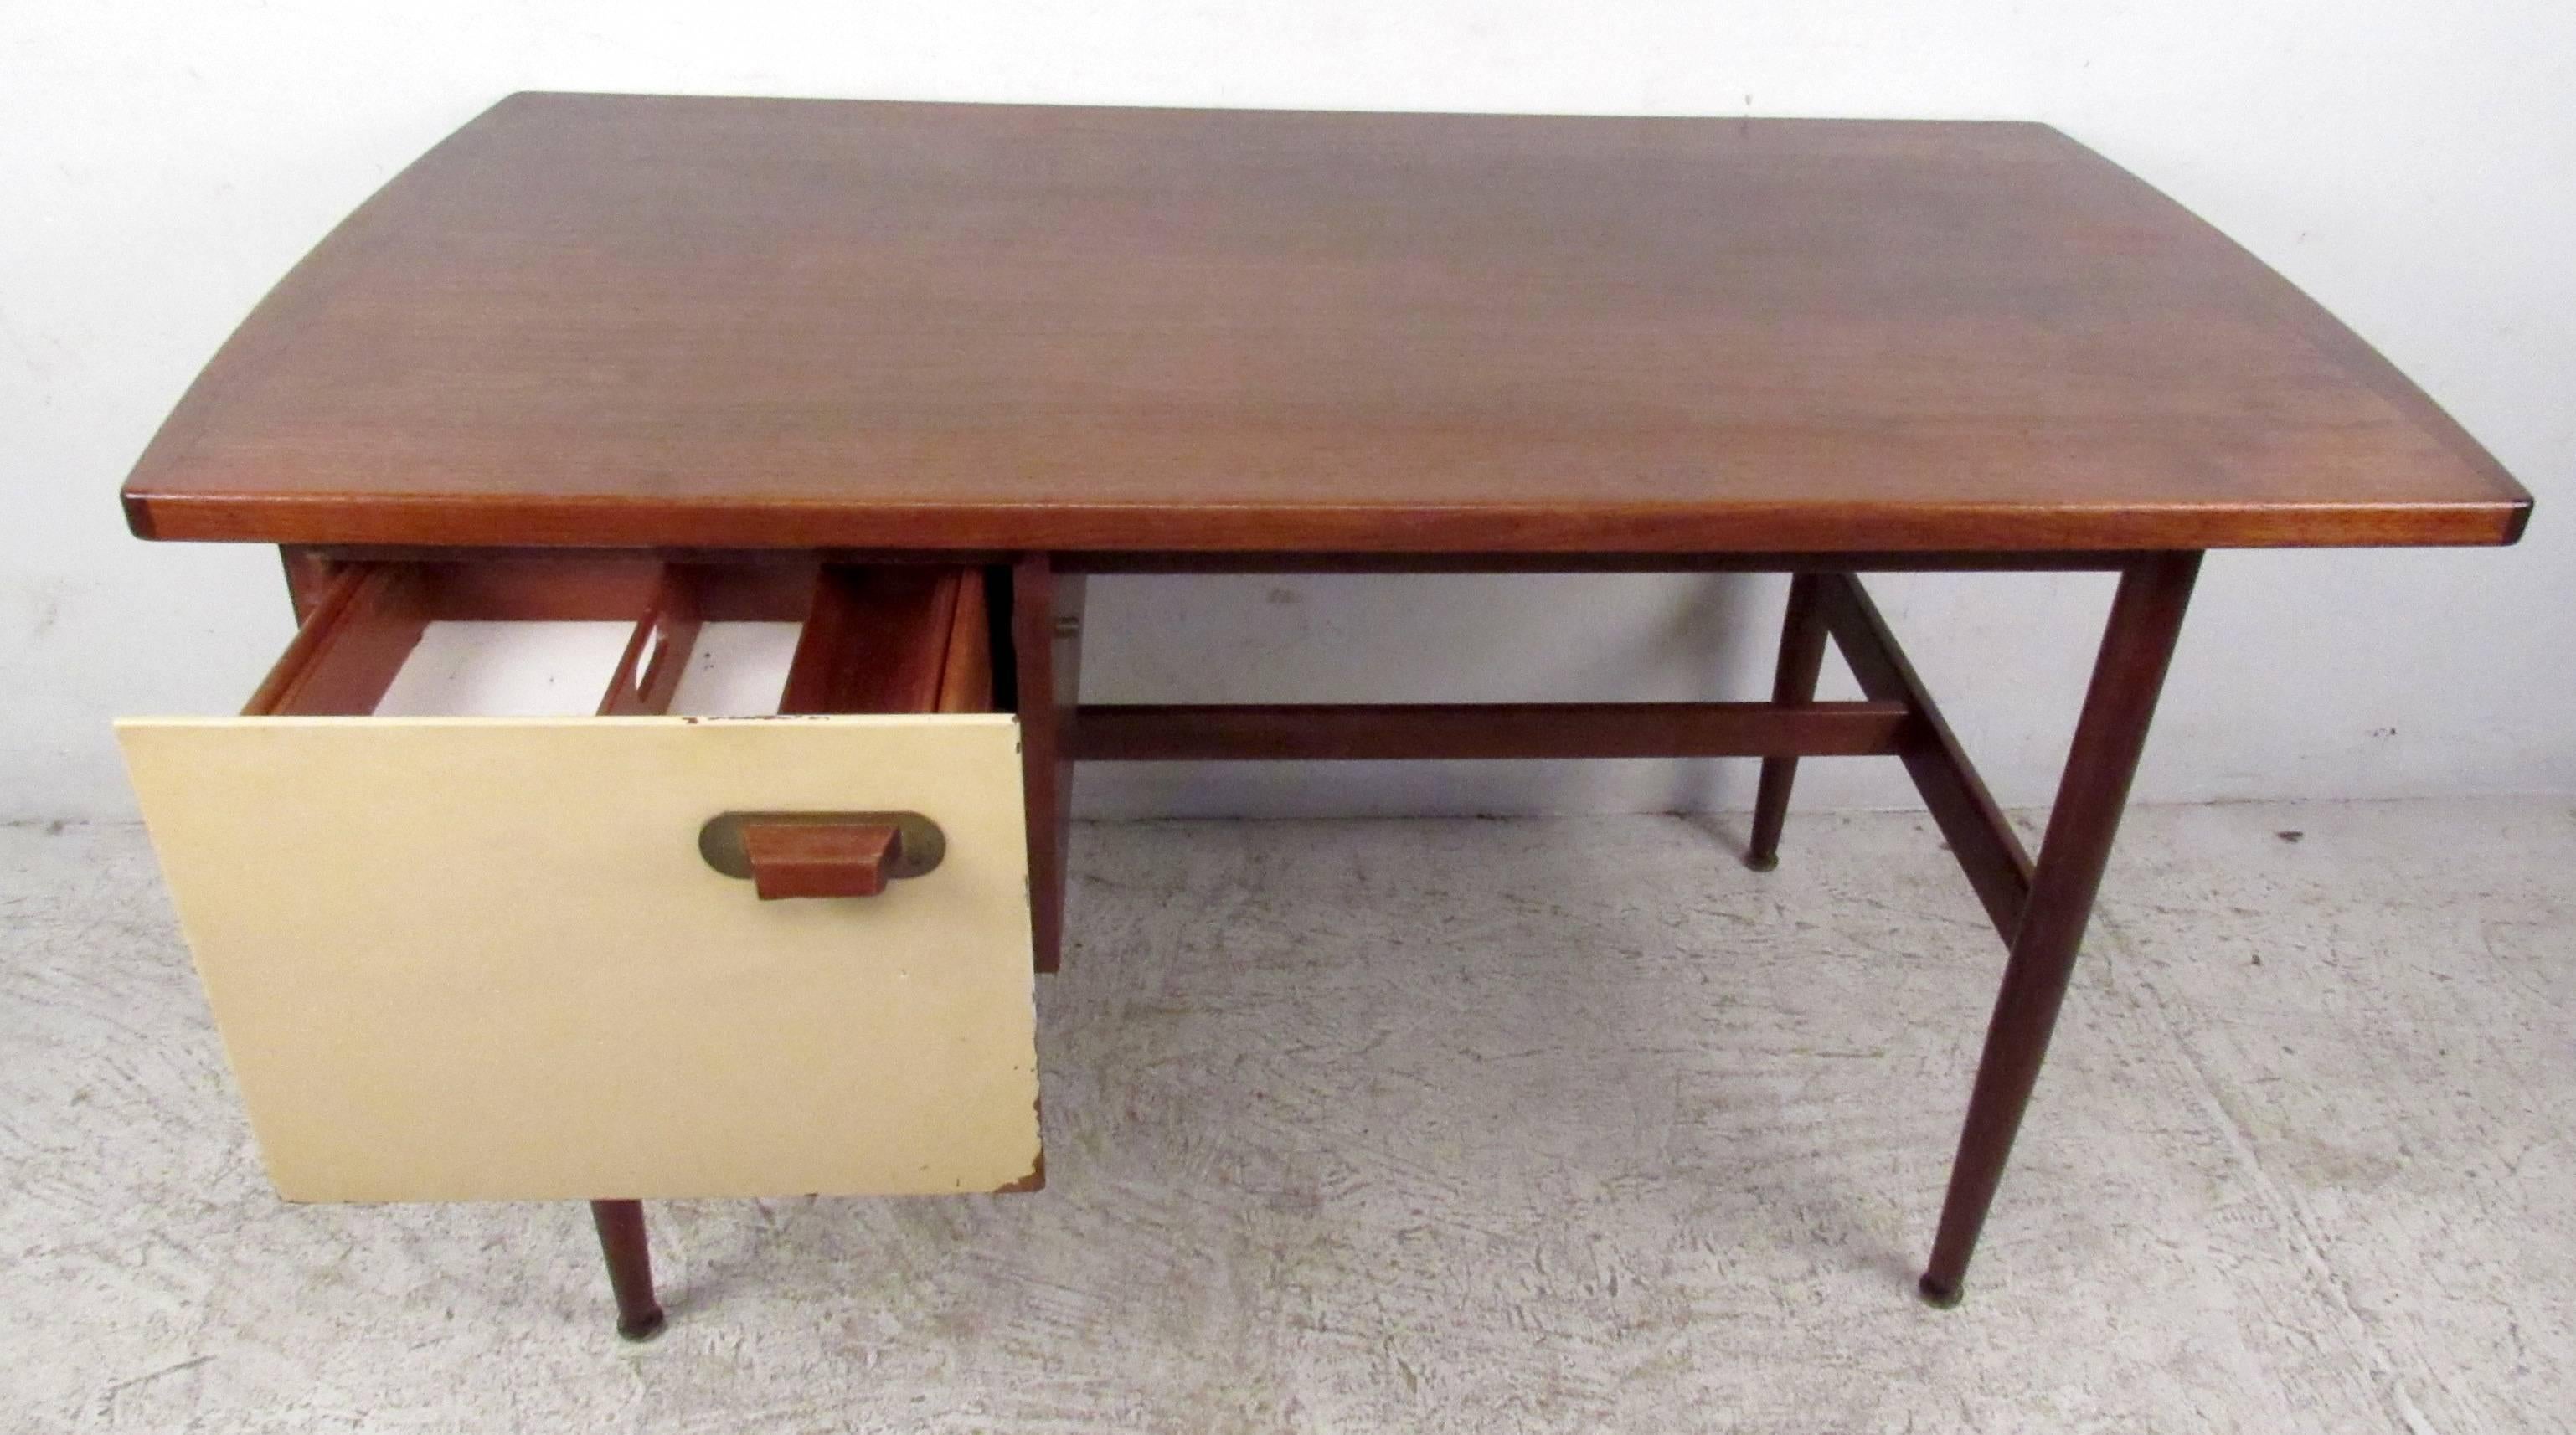 Vintage-modern desk featuring unique pulls, finished back and painted finish, designed by Jens Risom.

Please confirm item location NY or NJ with dealer.